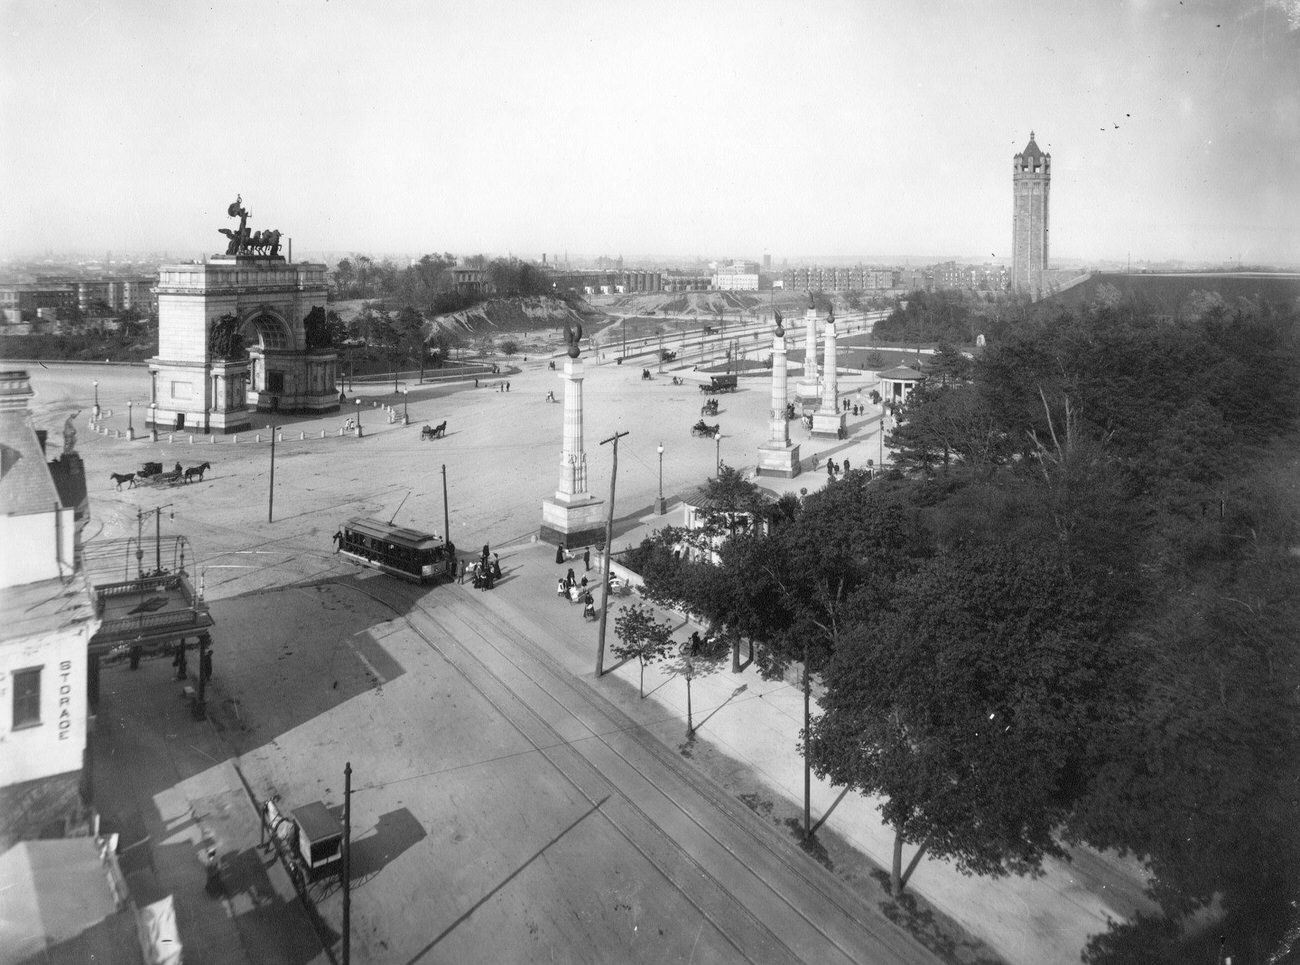 Grand Army Plaza And Prospect Park Entrance, Brooklyn, 1895